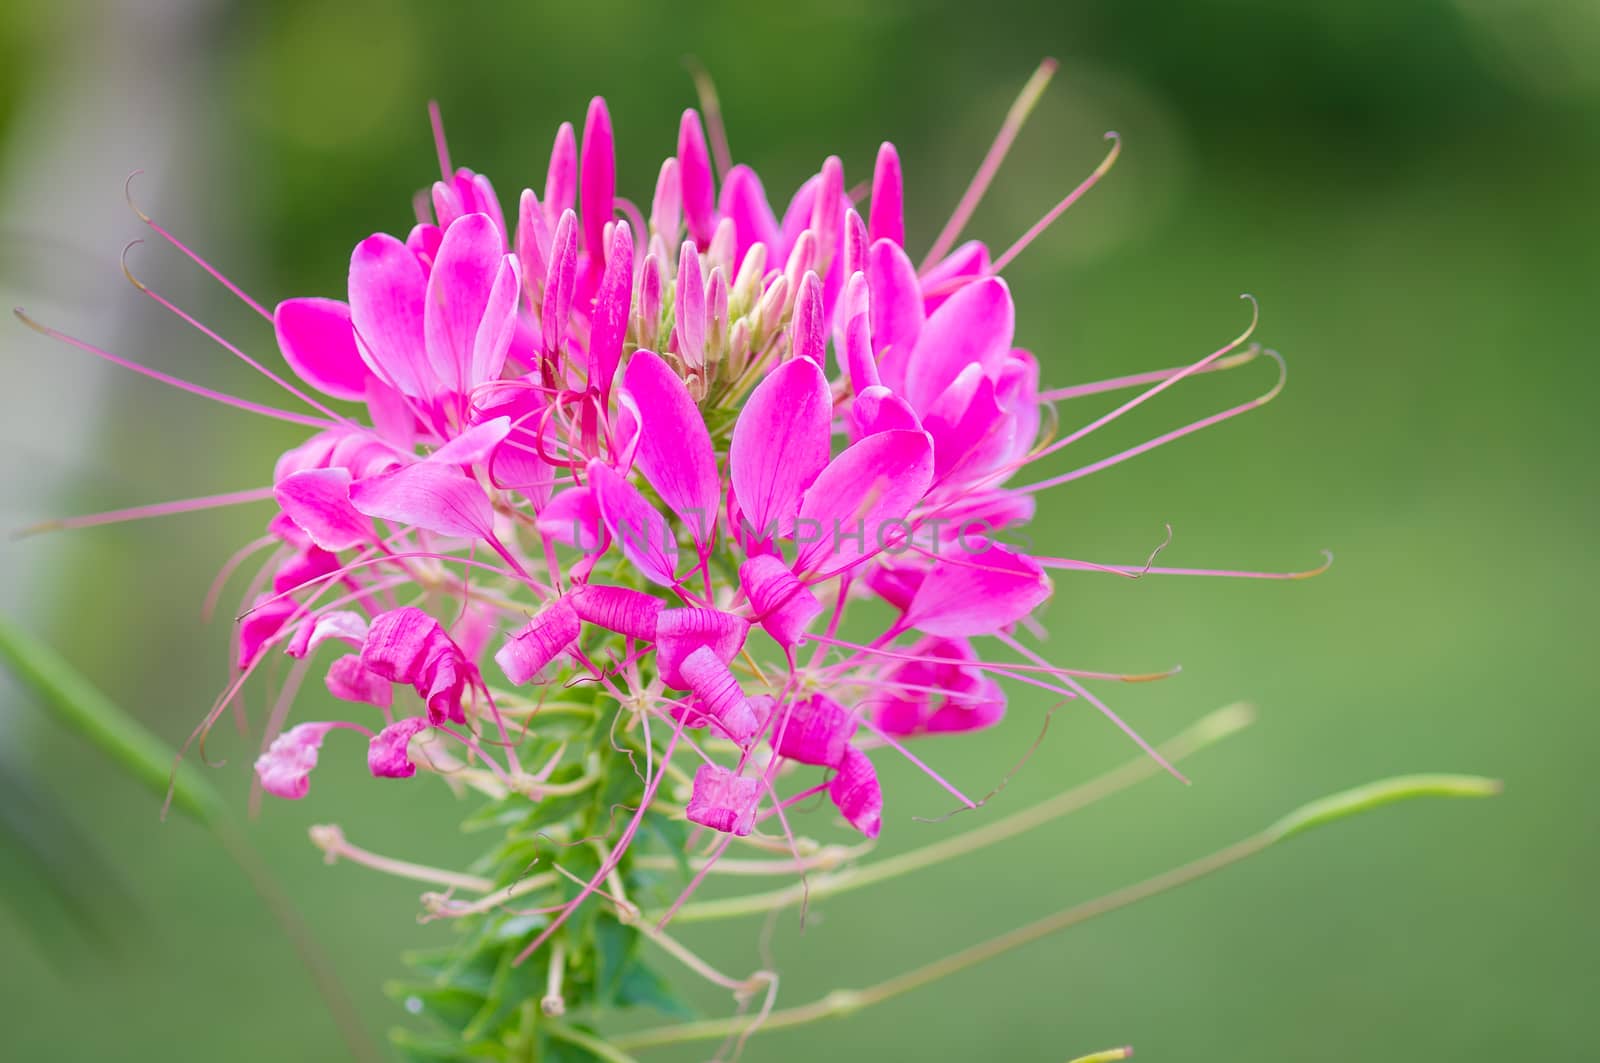 Spider flower, Cleome hassleriana by seksan44